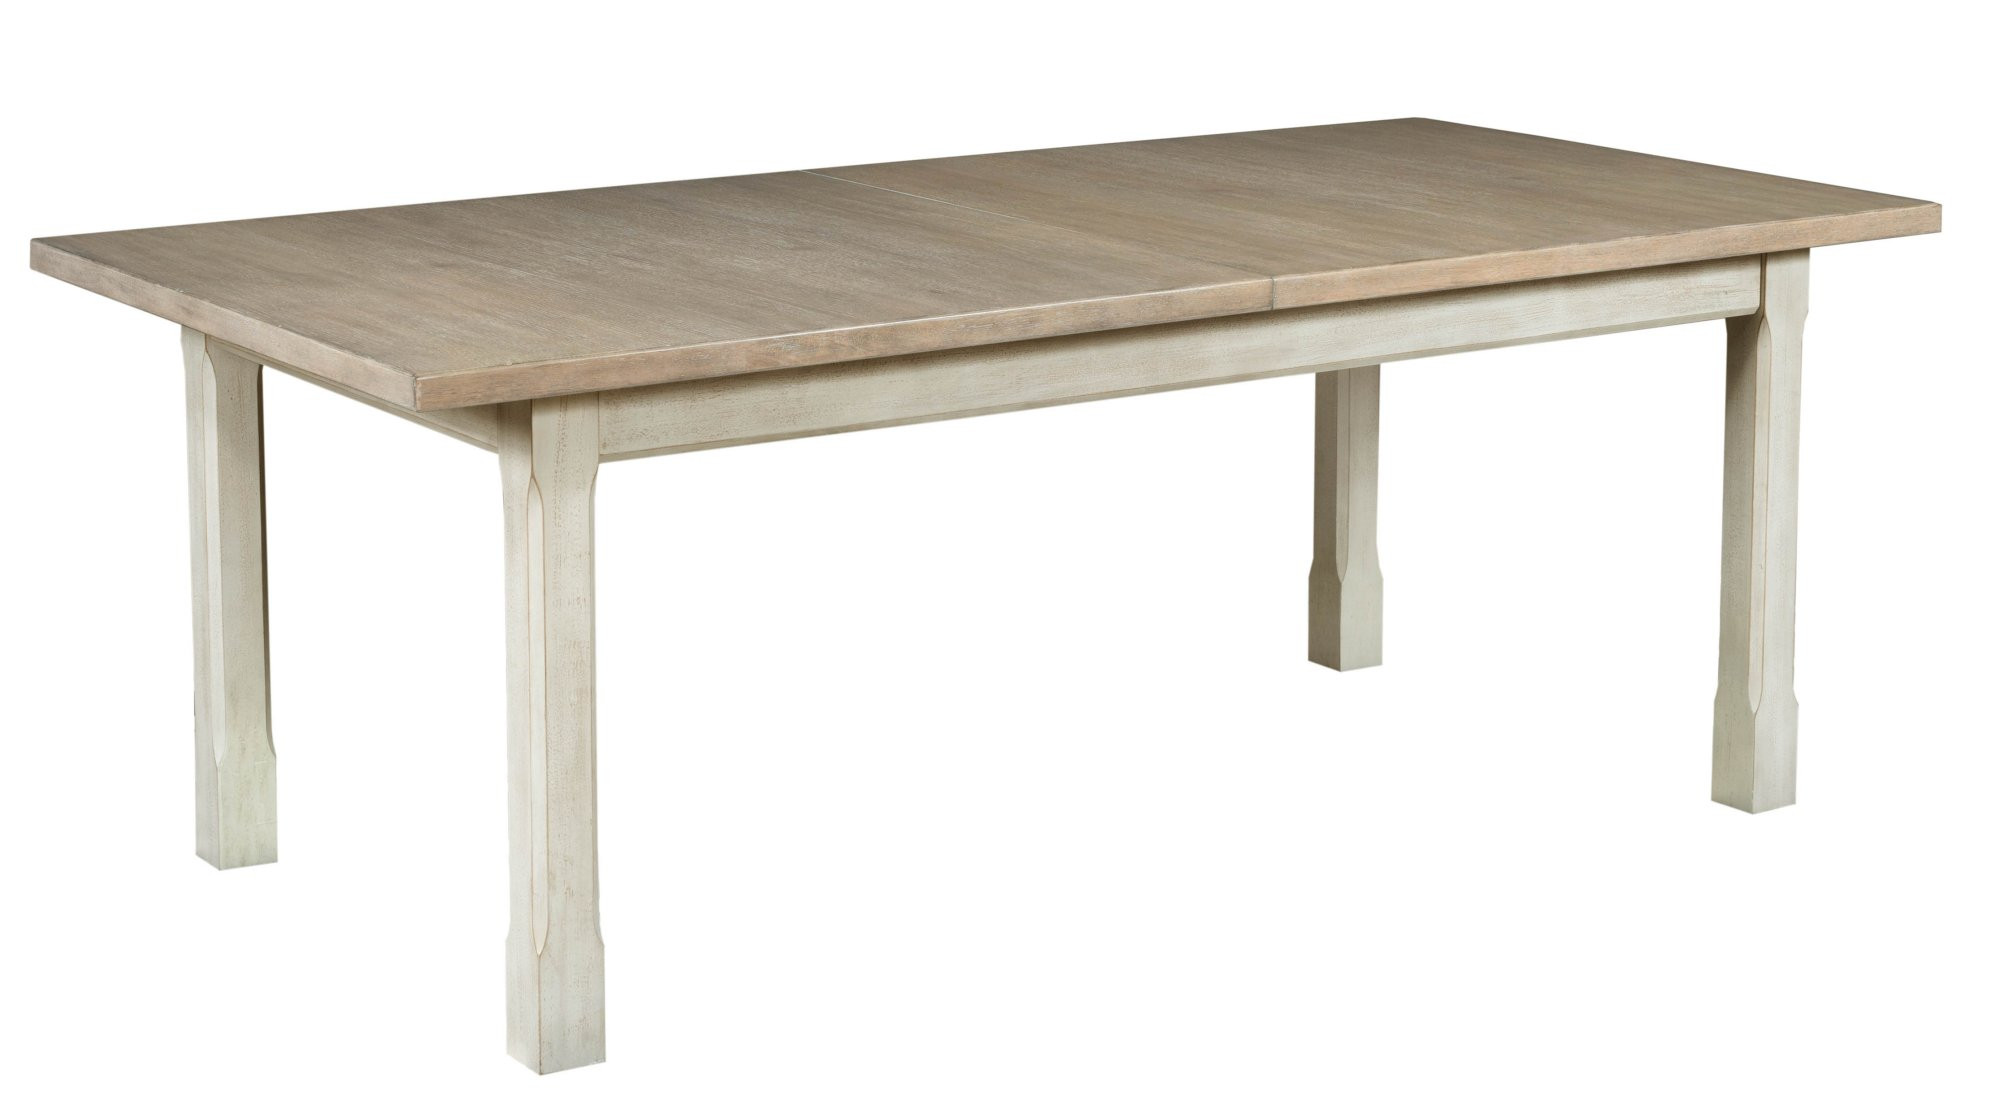 Boathouse Dining Table w/ 2 18 Inch Leaves